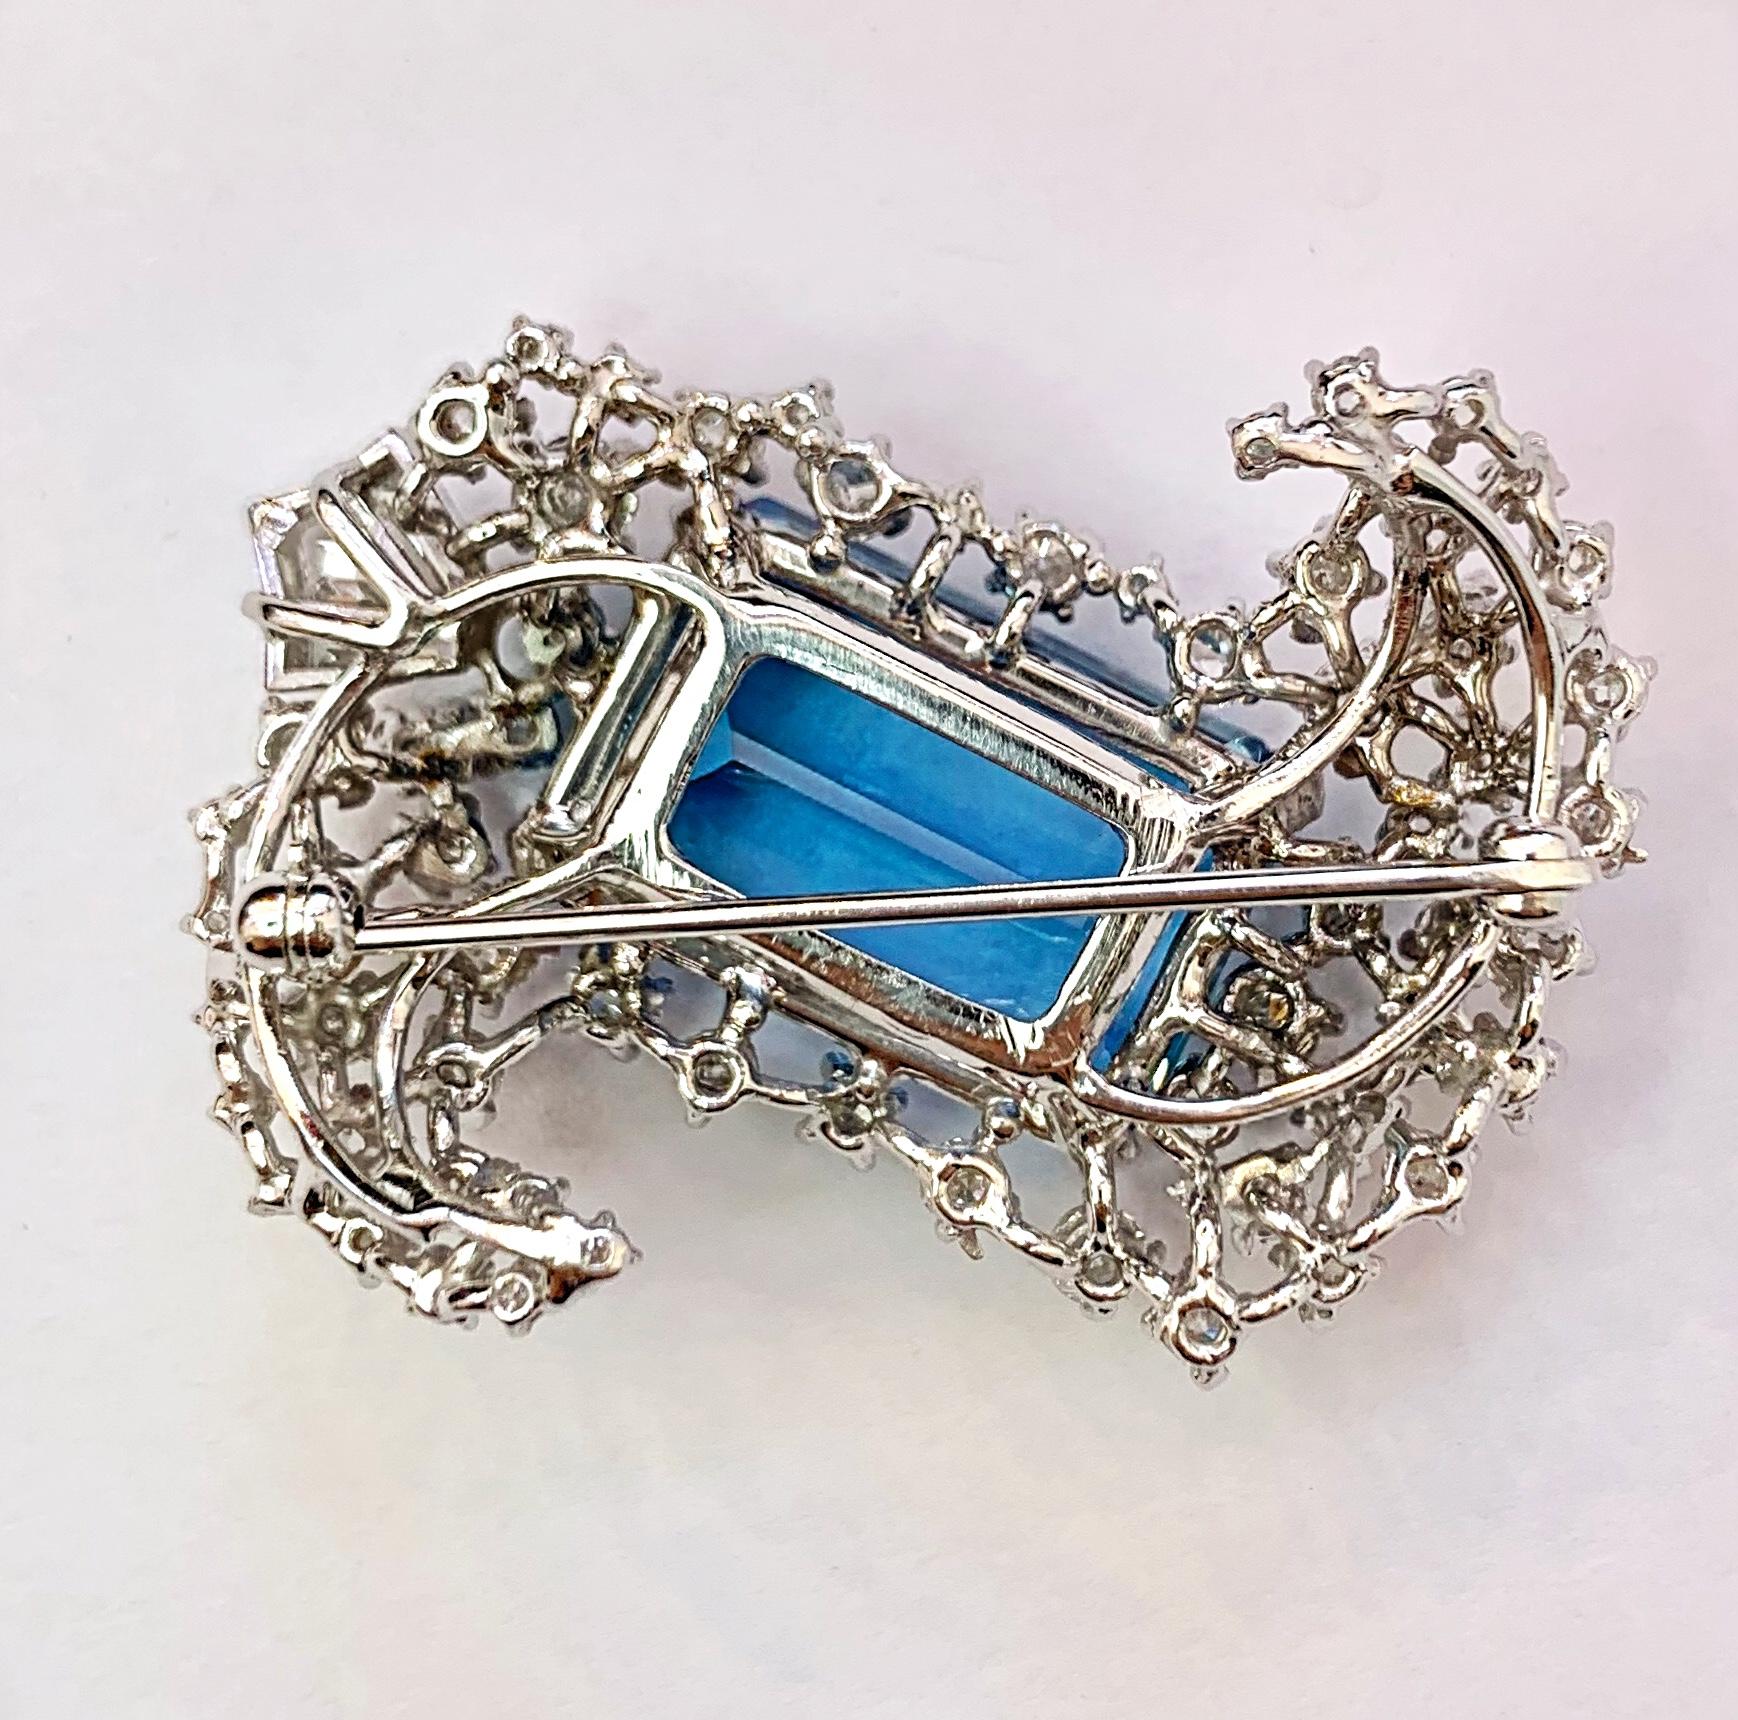 Gorgeous 14K white gold blue aquamarine brooch circa 1940's. The emerald cut aquamarine weighs 22.57cts and it is surrounded by 66 brilliant cut, baguette cut and kite shape diamonds with a total weight of approximately 3.41cts. It measures 42mm